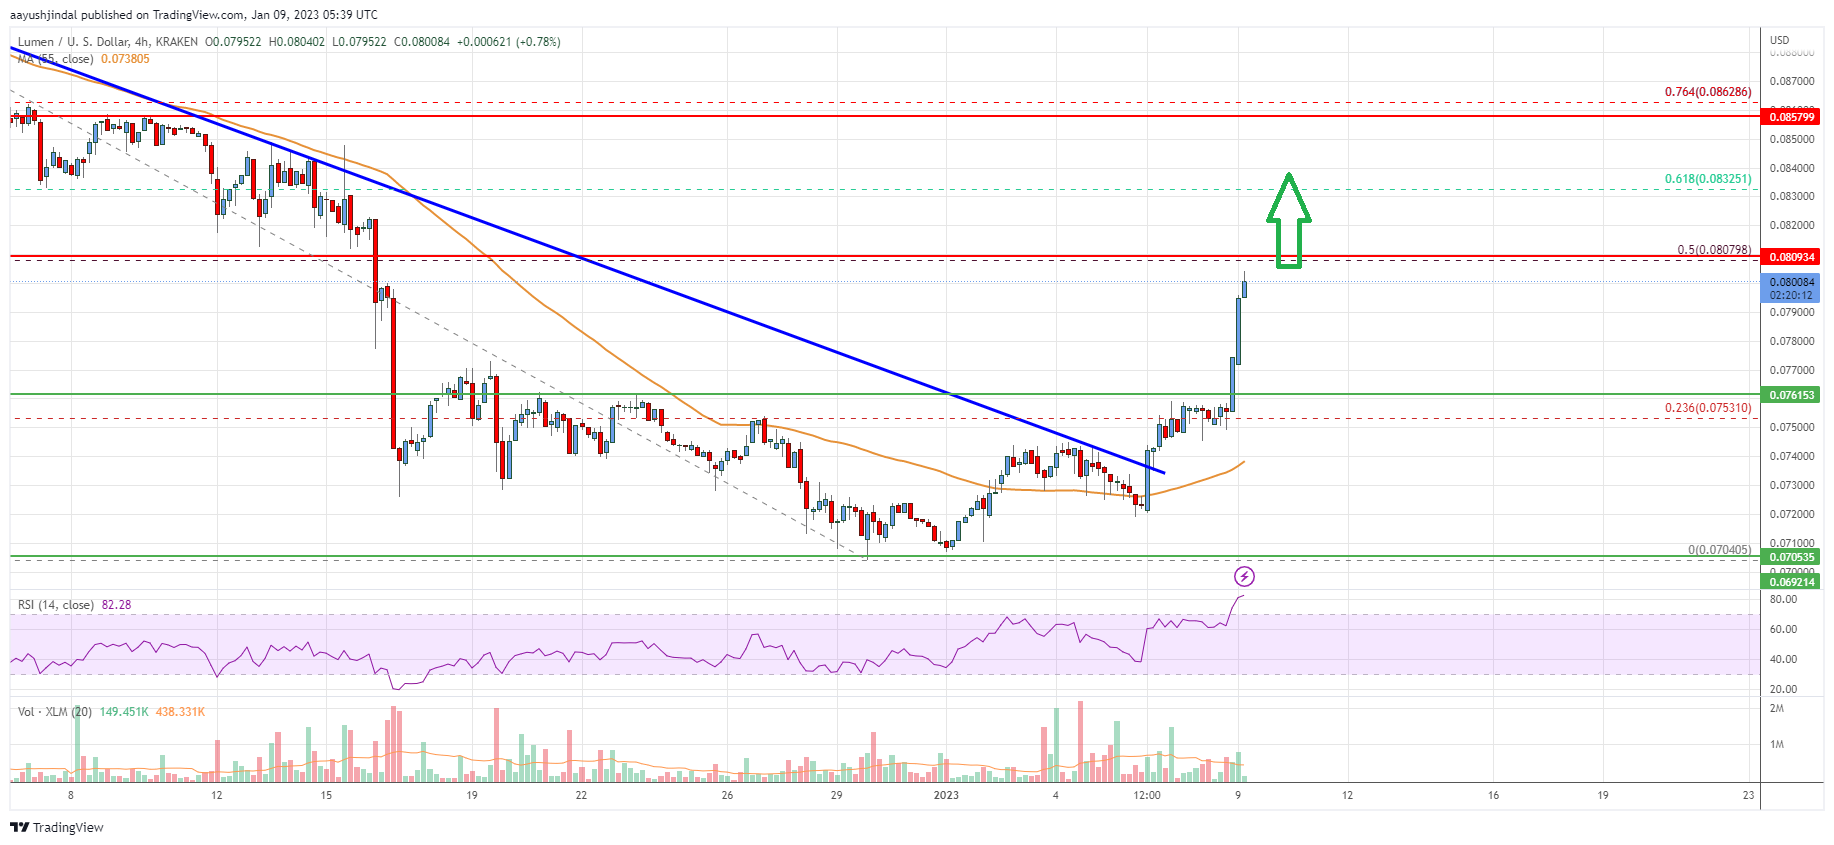 Stellar Lumen (XLM) Price Regains Traction, What Could Be The Target?